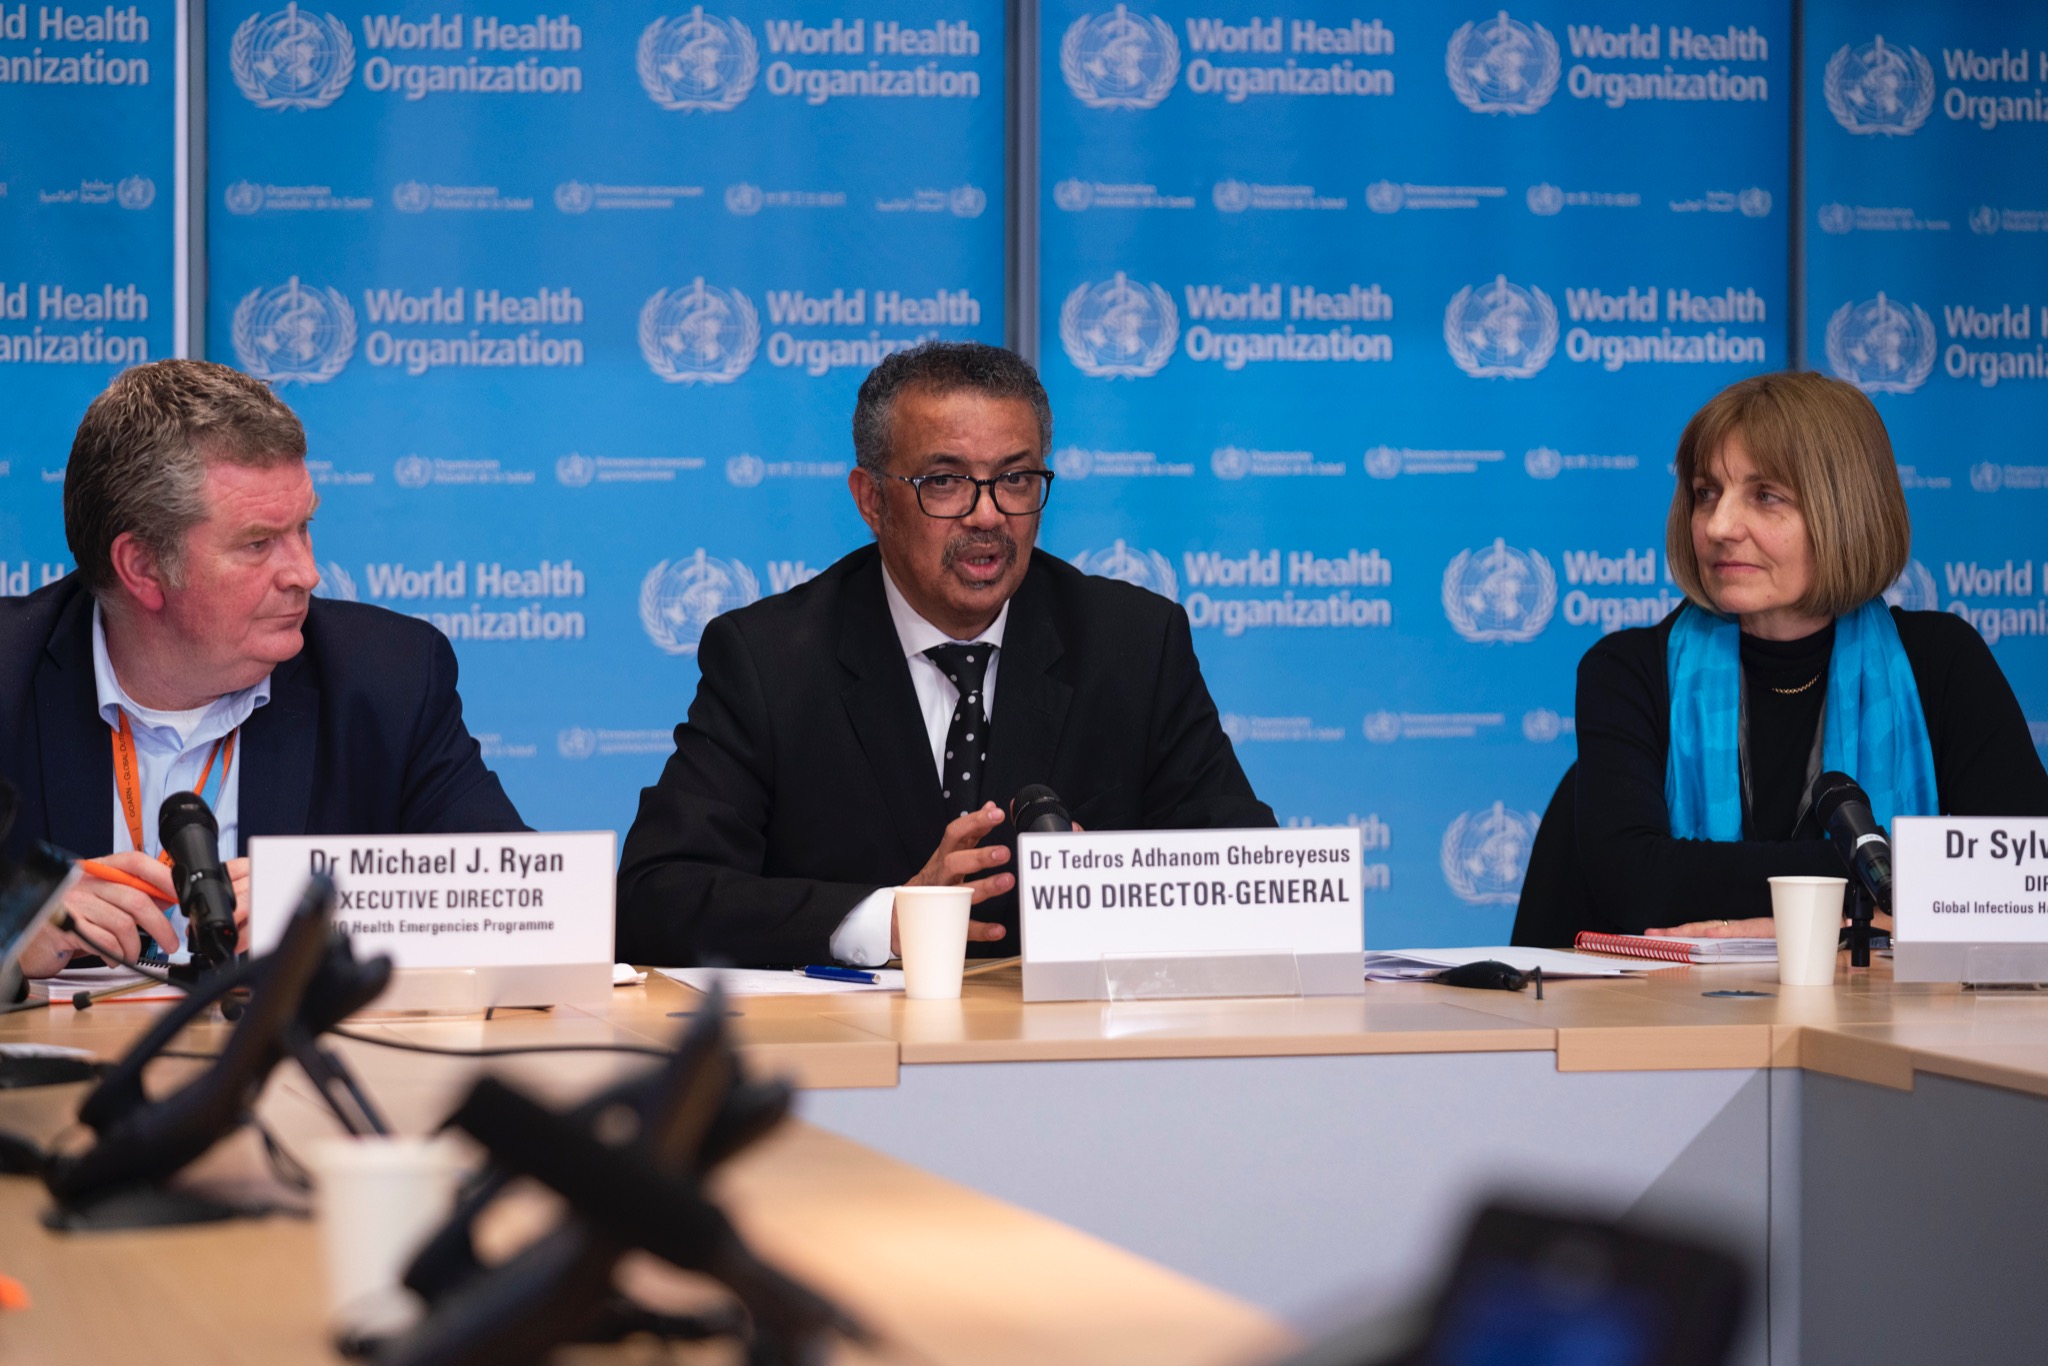 L-R: Dr Micheal J. Ryan, Executive Director; Dr Tedros Ghebreyesus, WHO Director General; Head of WHO’s Global Infectious Hazard Preparedness division, Sylvie Briand.